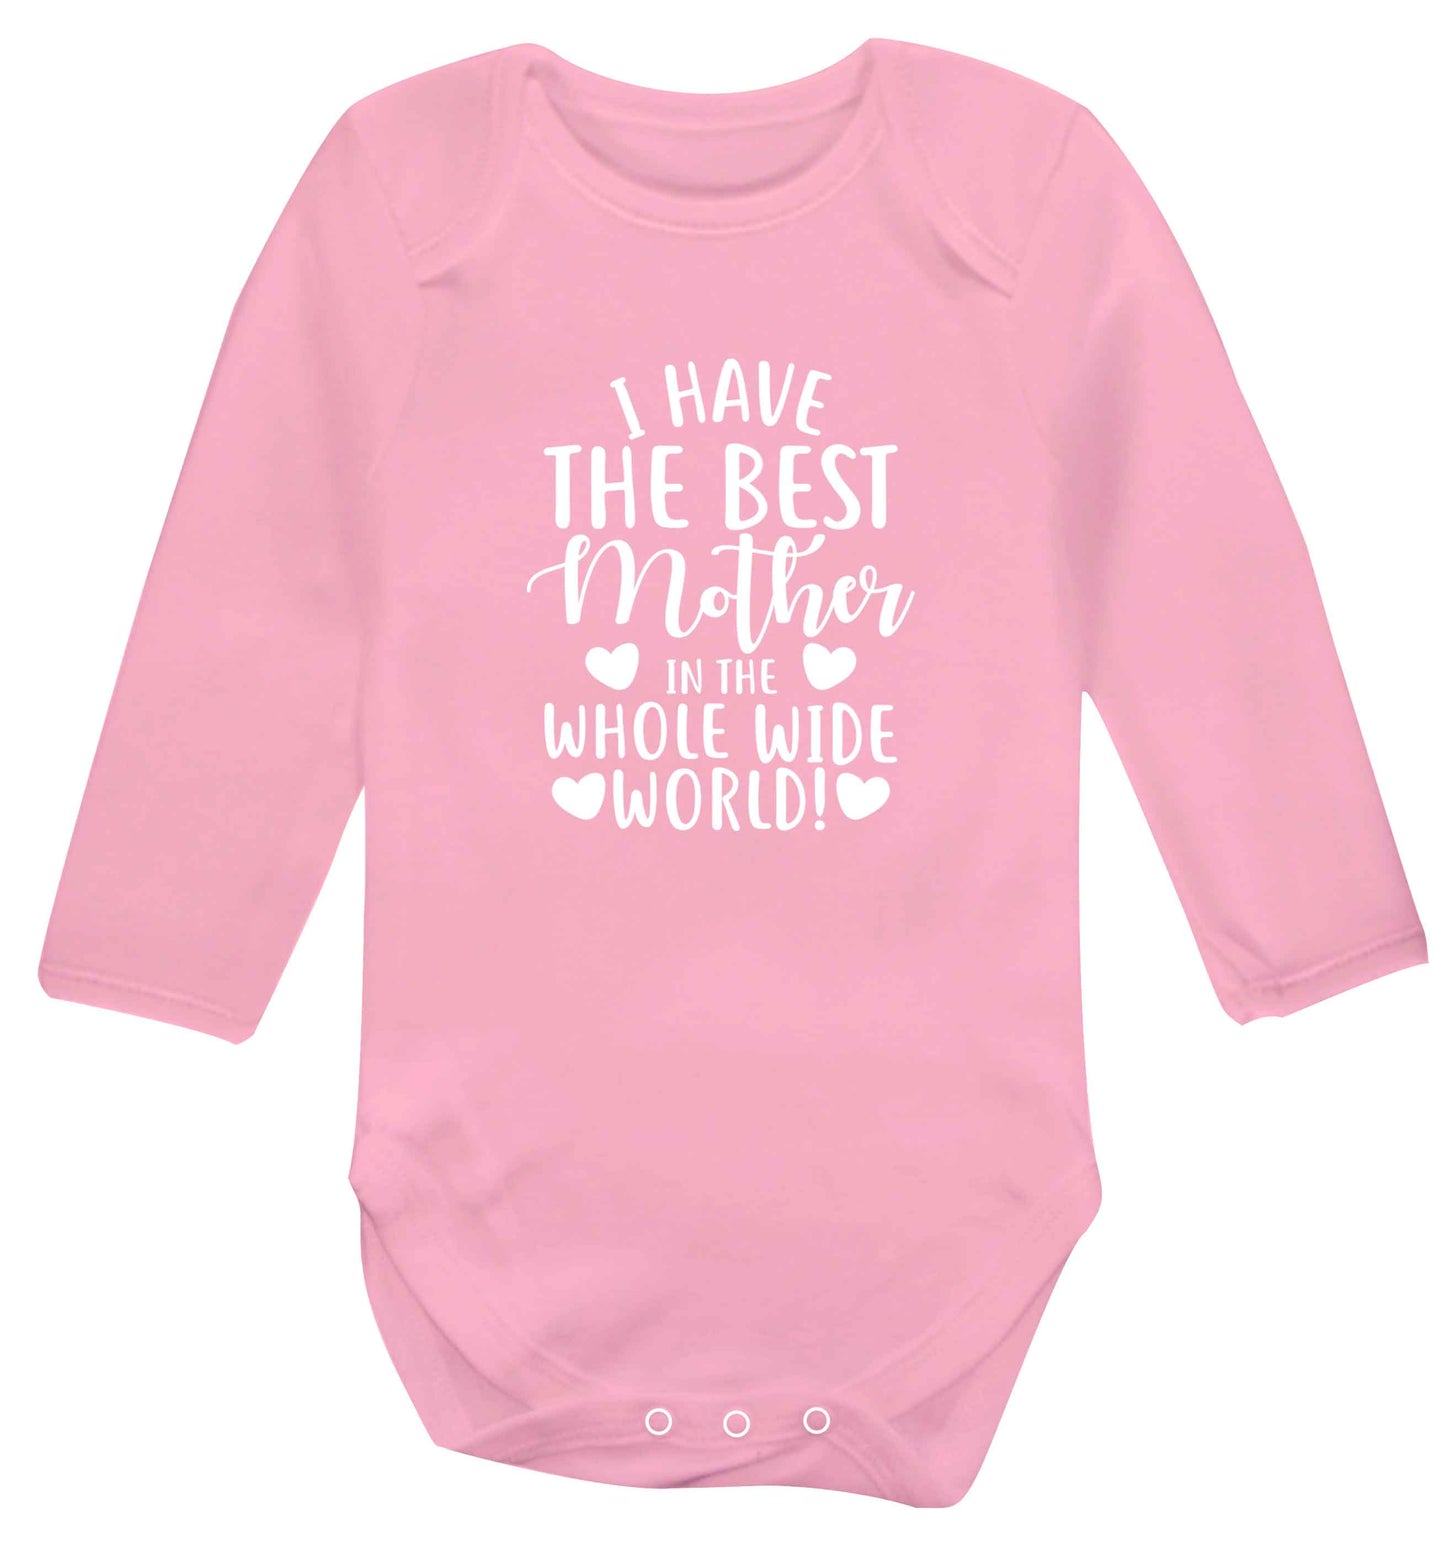 I have the best mother in the whole wide world baby vest long sleeved pale pink 6-12 months